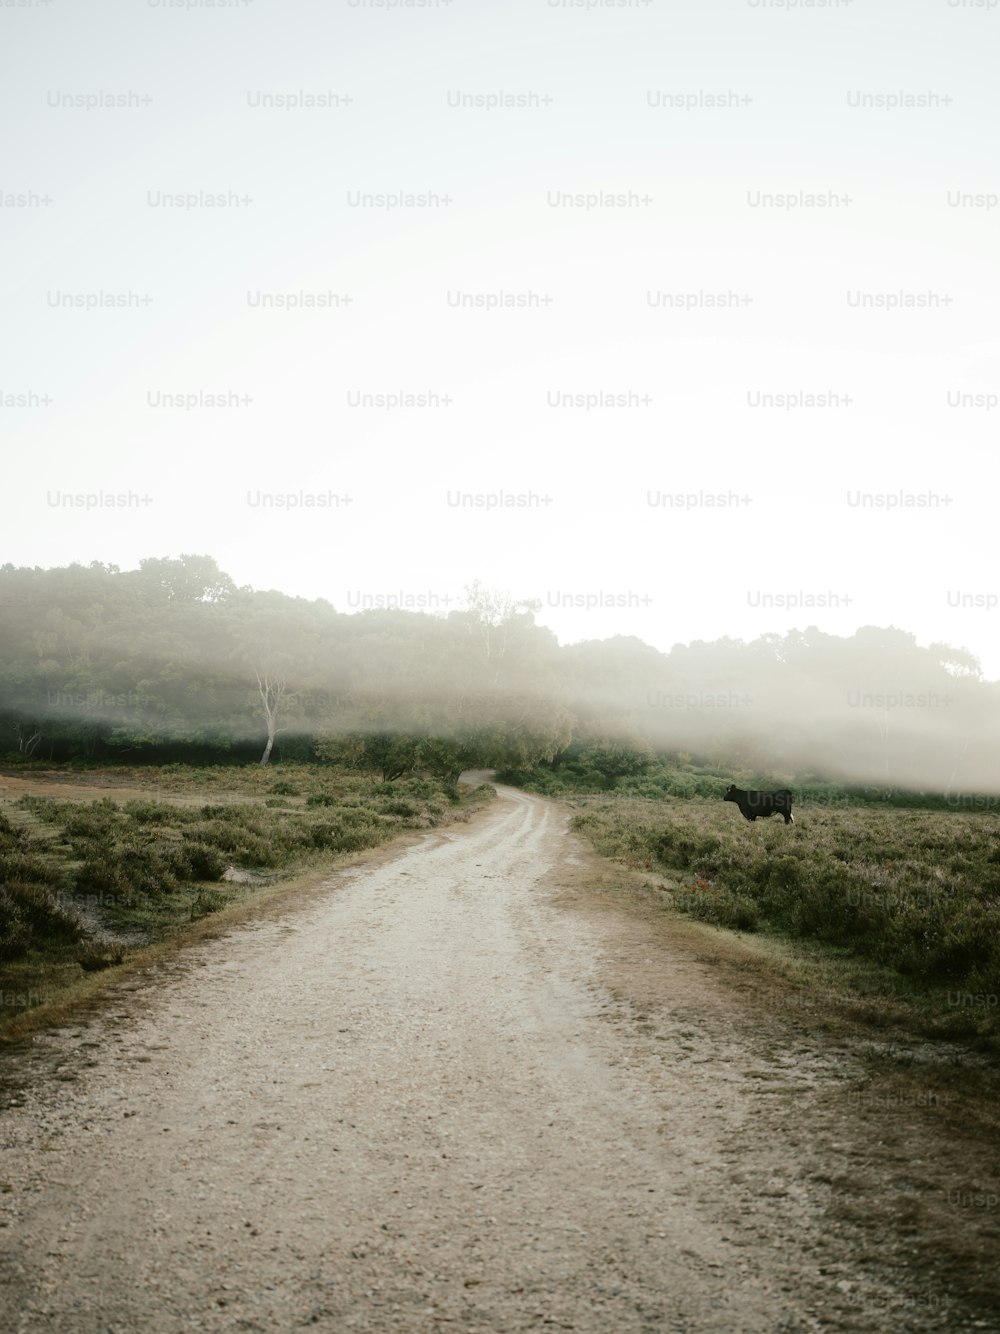 a cow standing on a dirt road in the middle of a field